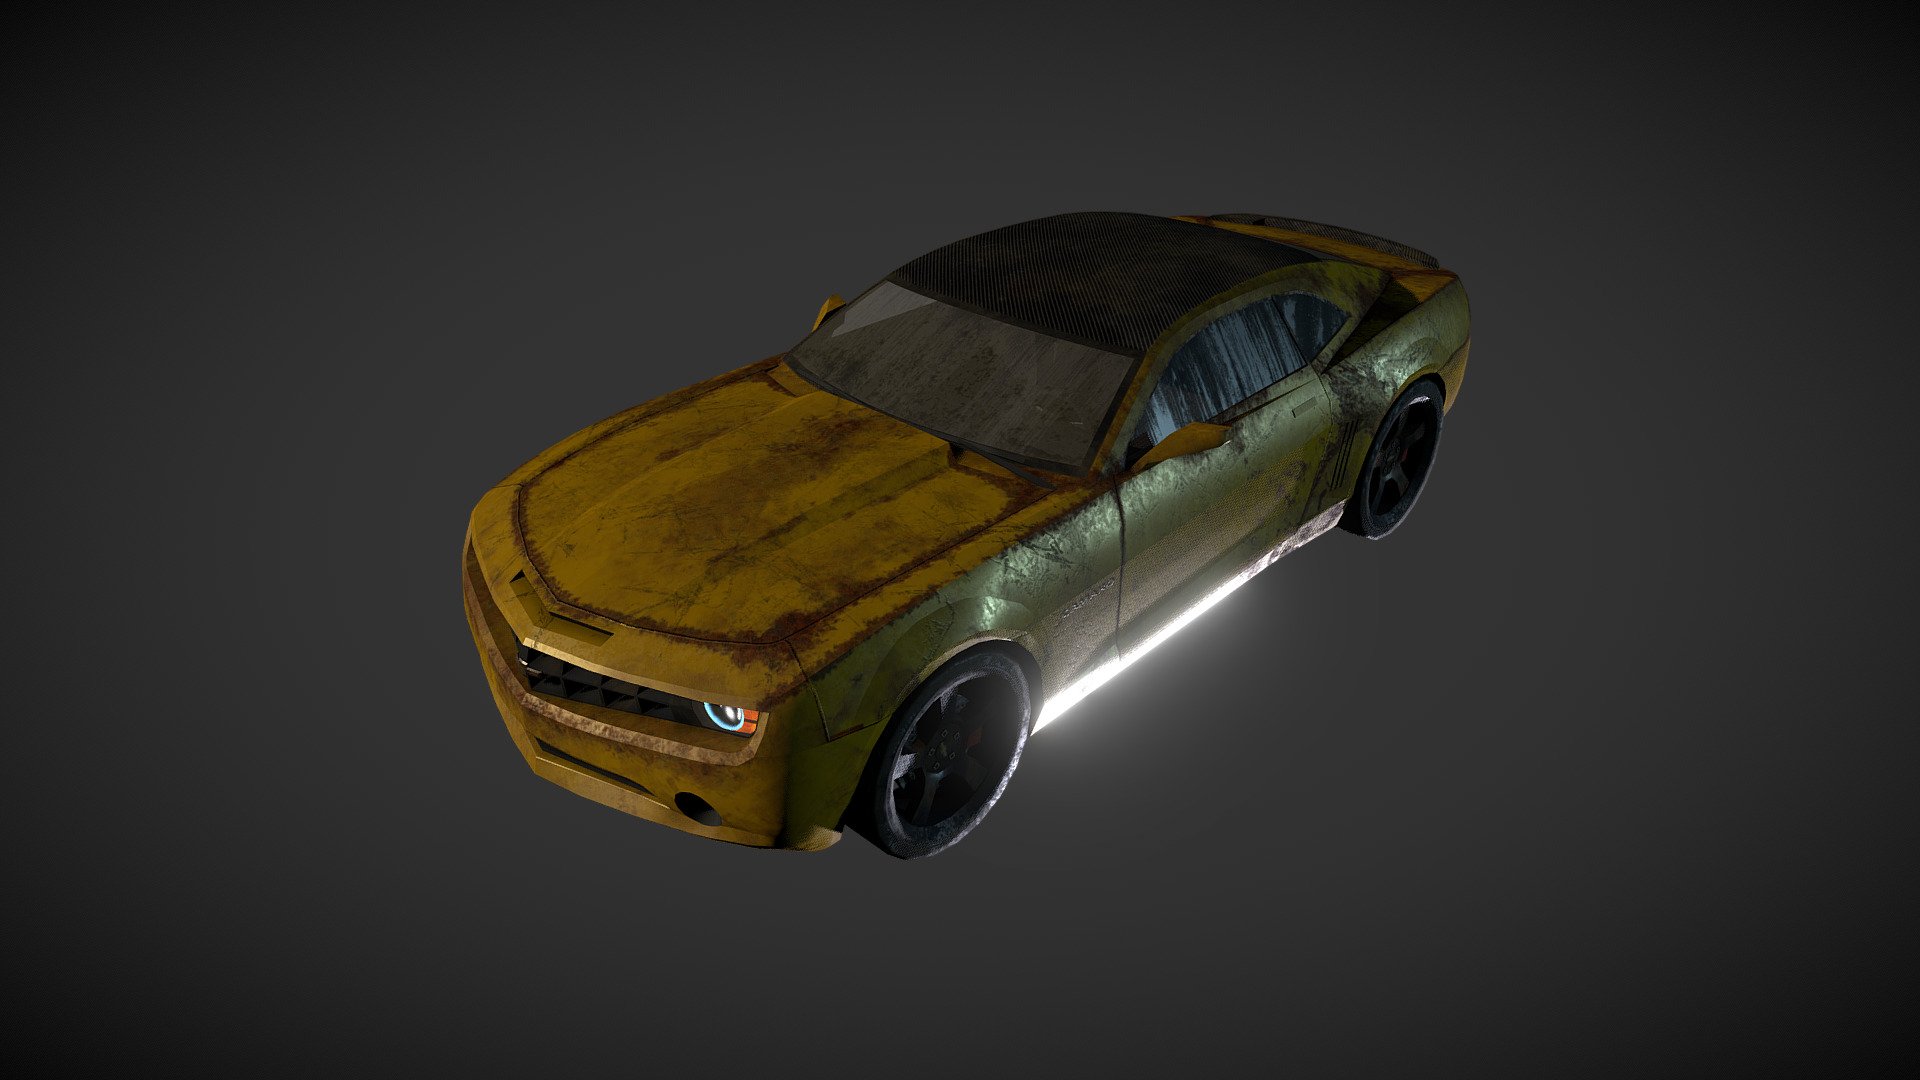 Old Rusty version of Chevrolet Camaro 2010, modeled in Maya and textured in Photoshop 3d model